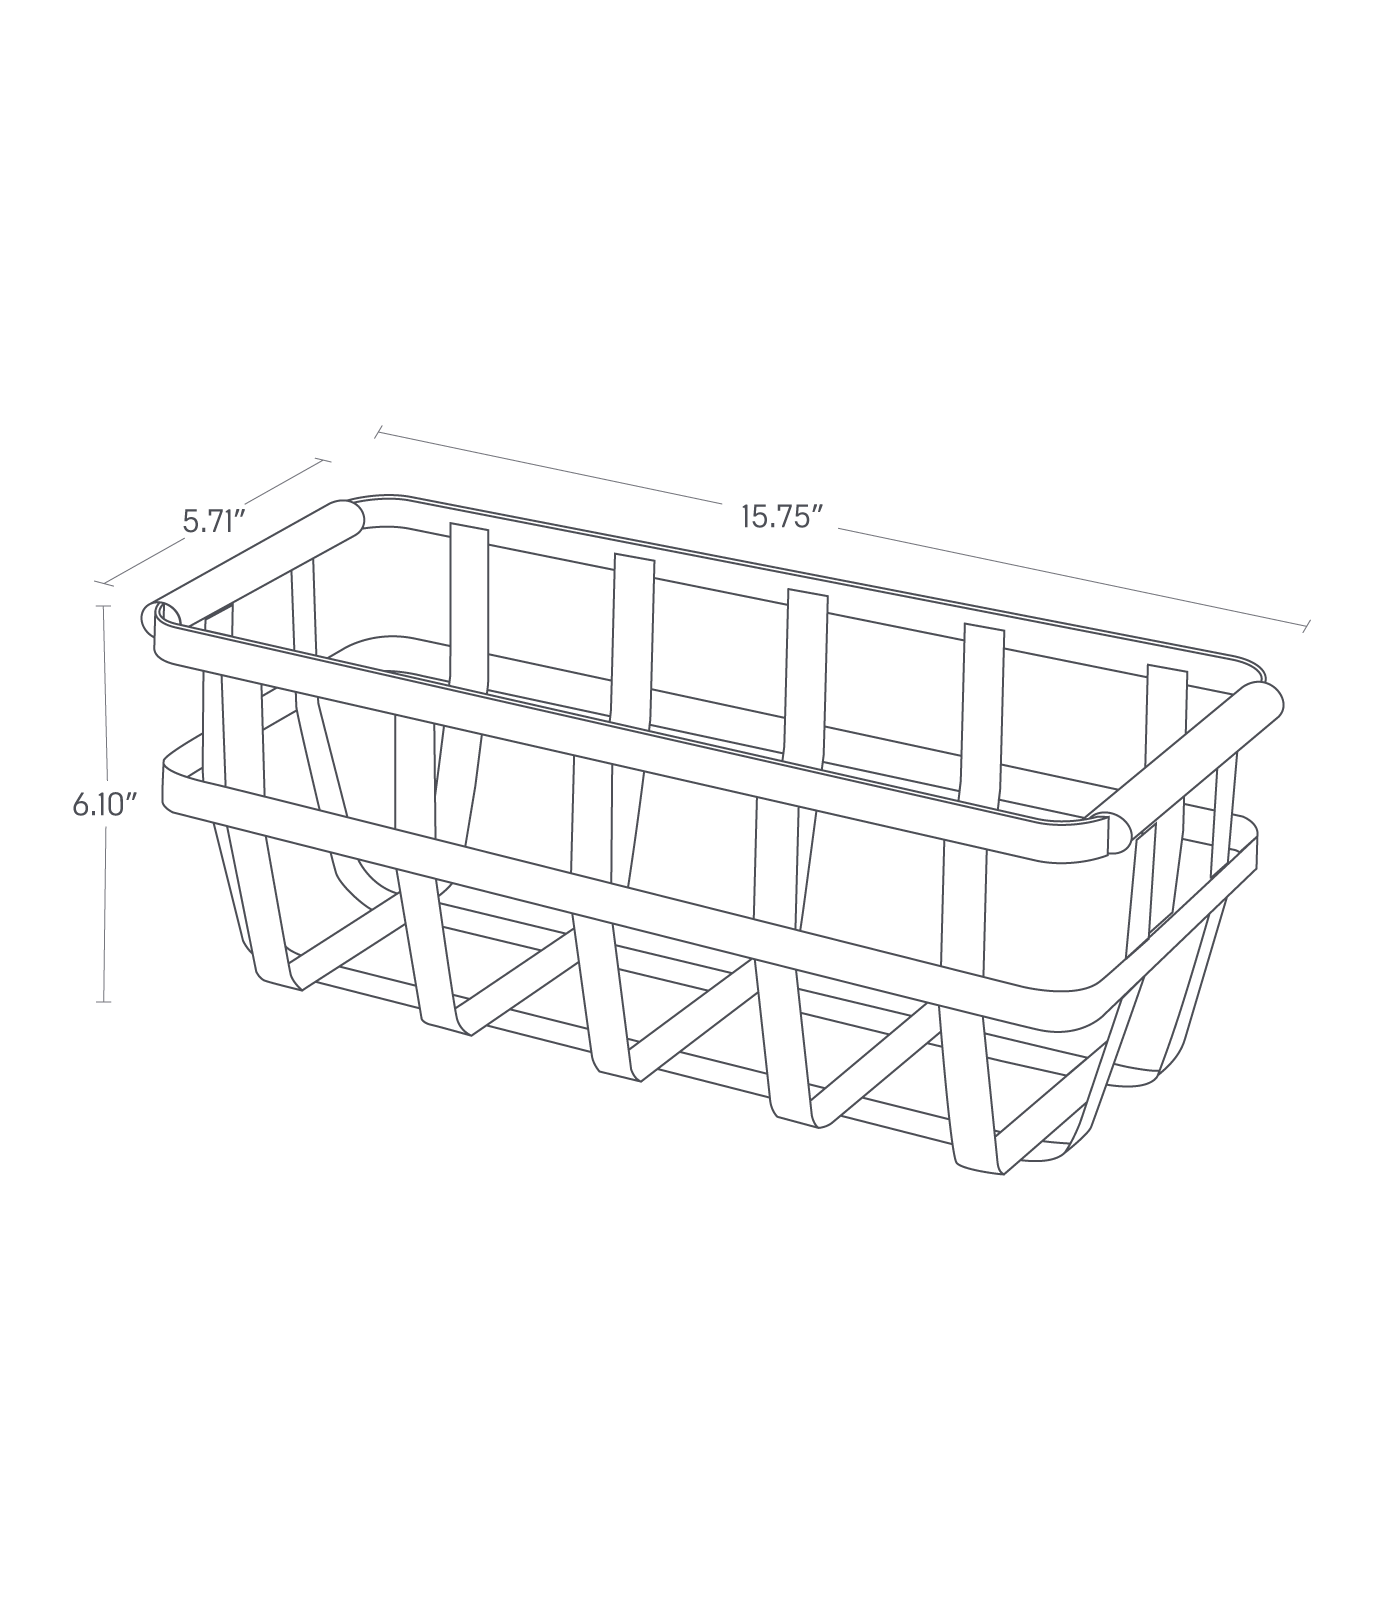 Dimension image for Storage Basket showing container height of 6.10